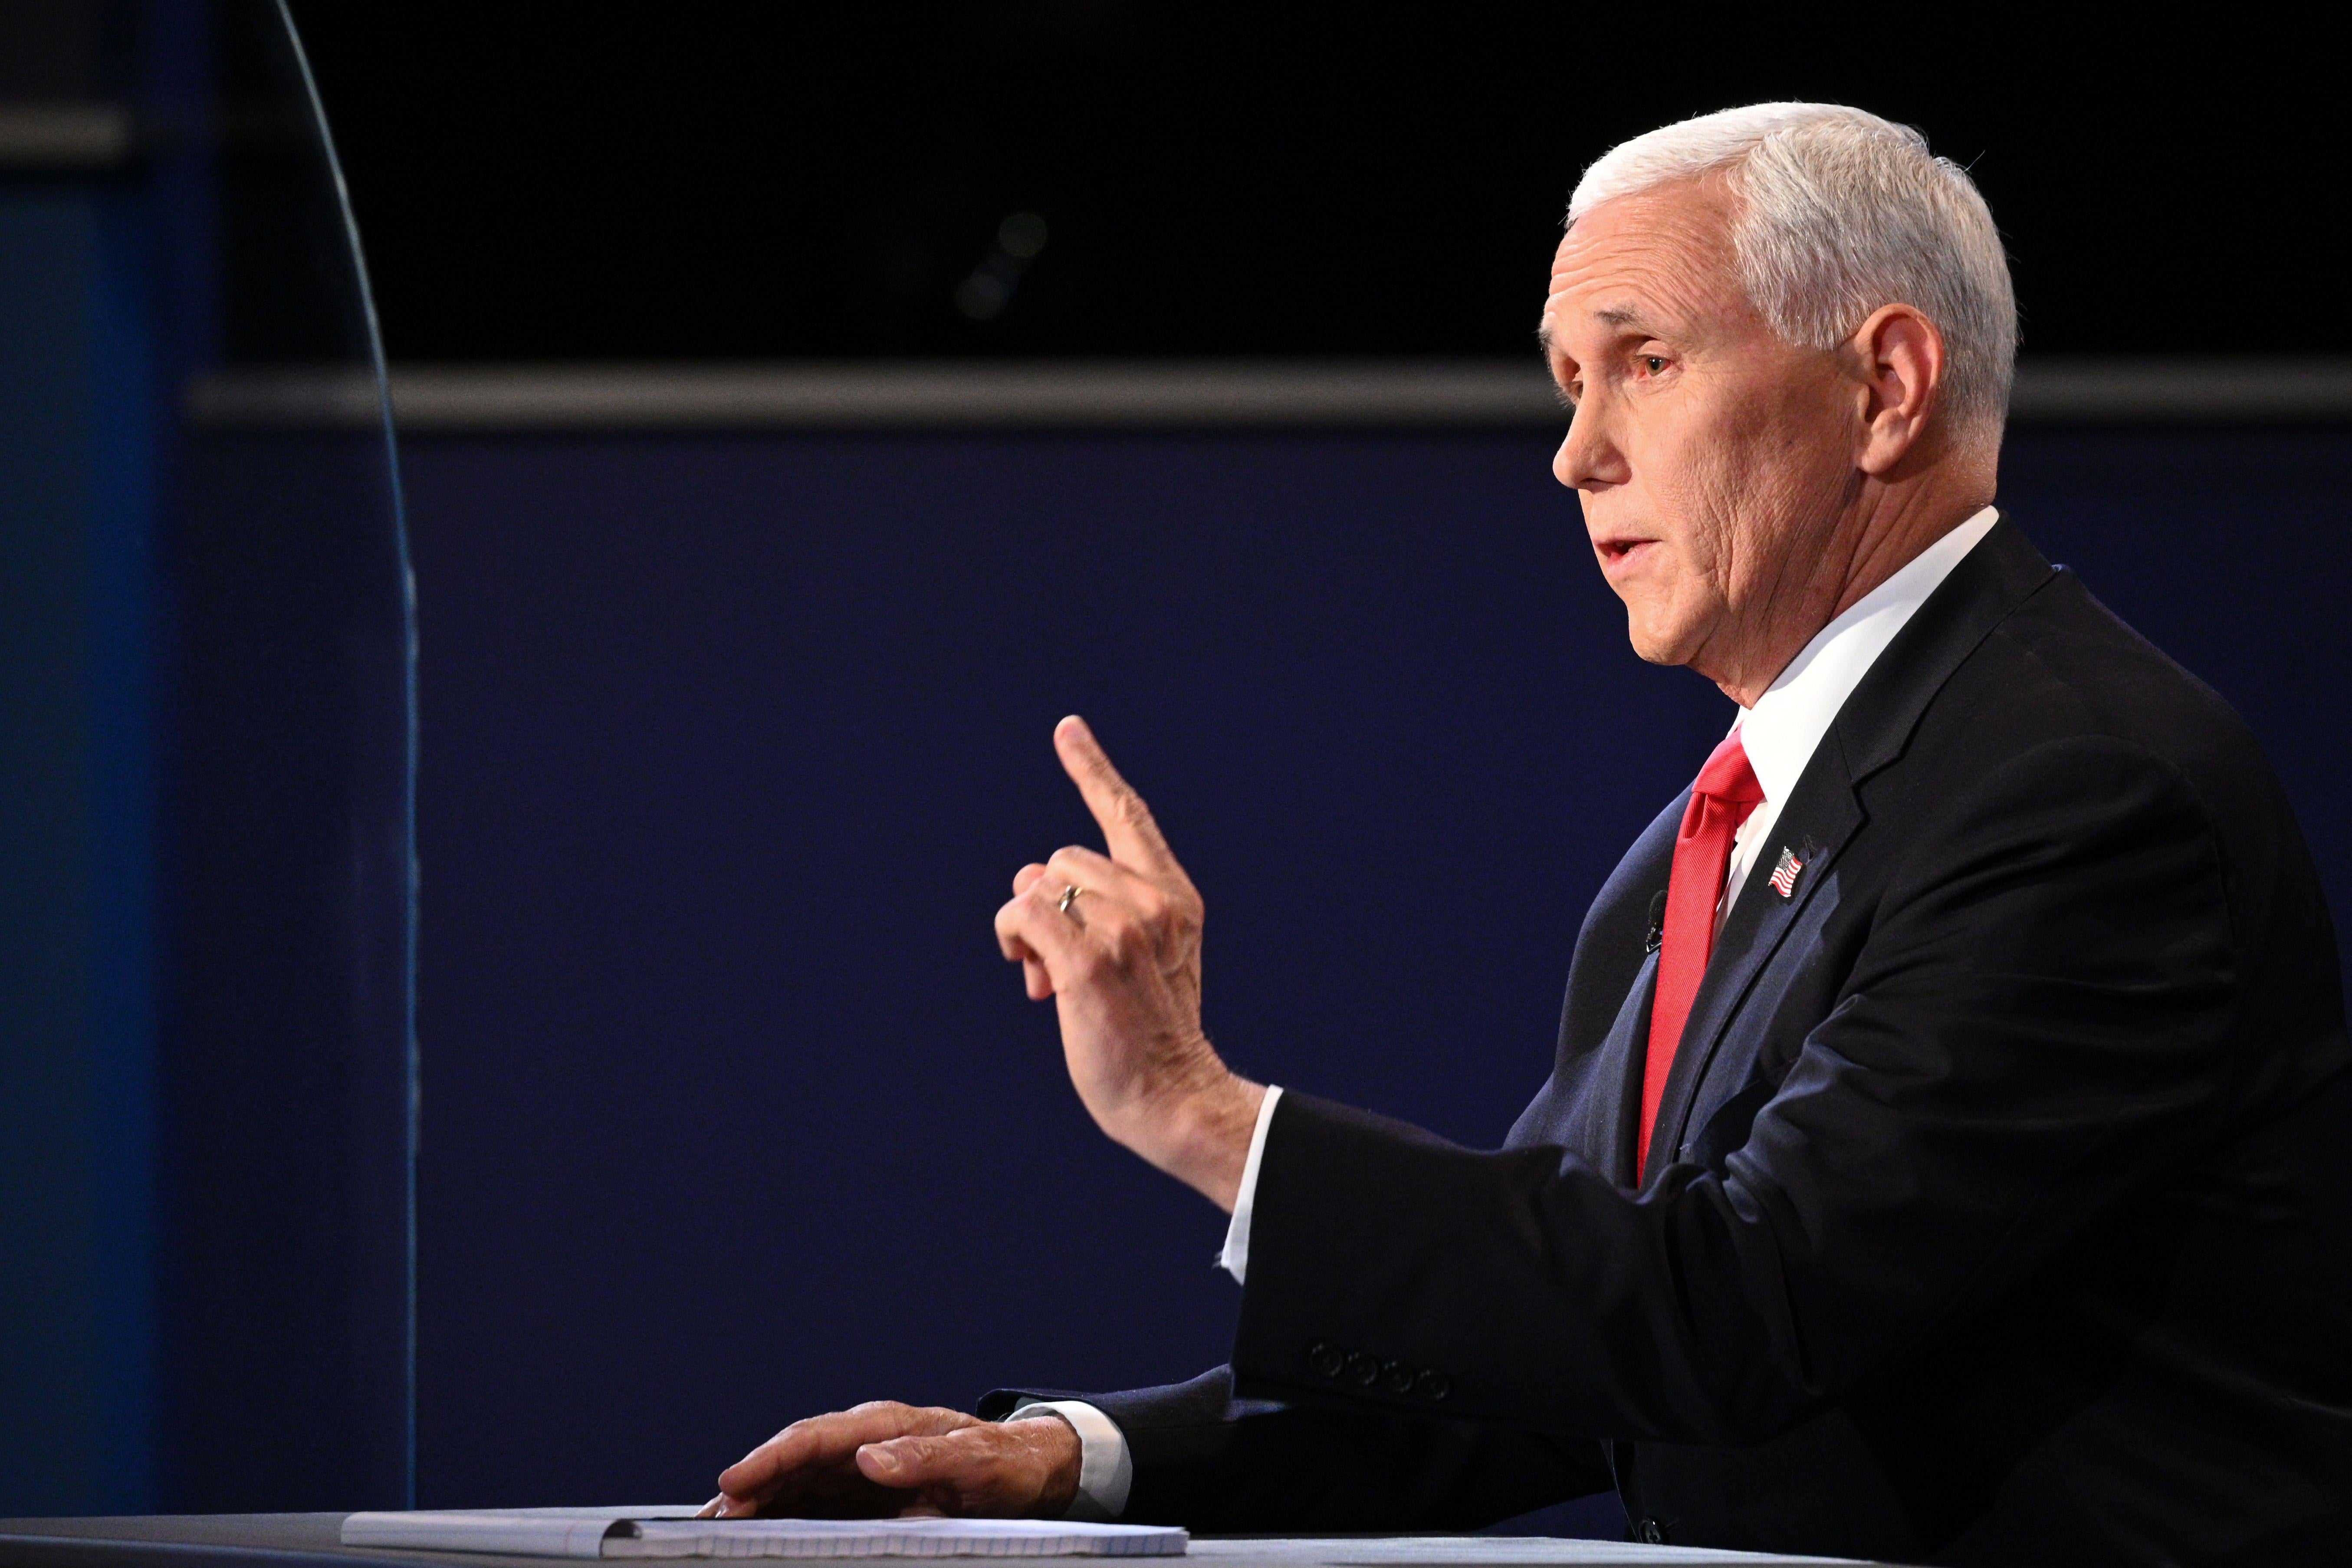 Mike Pence, in profile at the right side of the picture, speaks while sitting with his right hand flat on a desk and his left index finger wagging.  